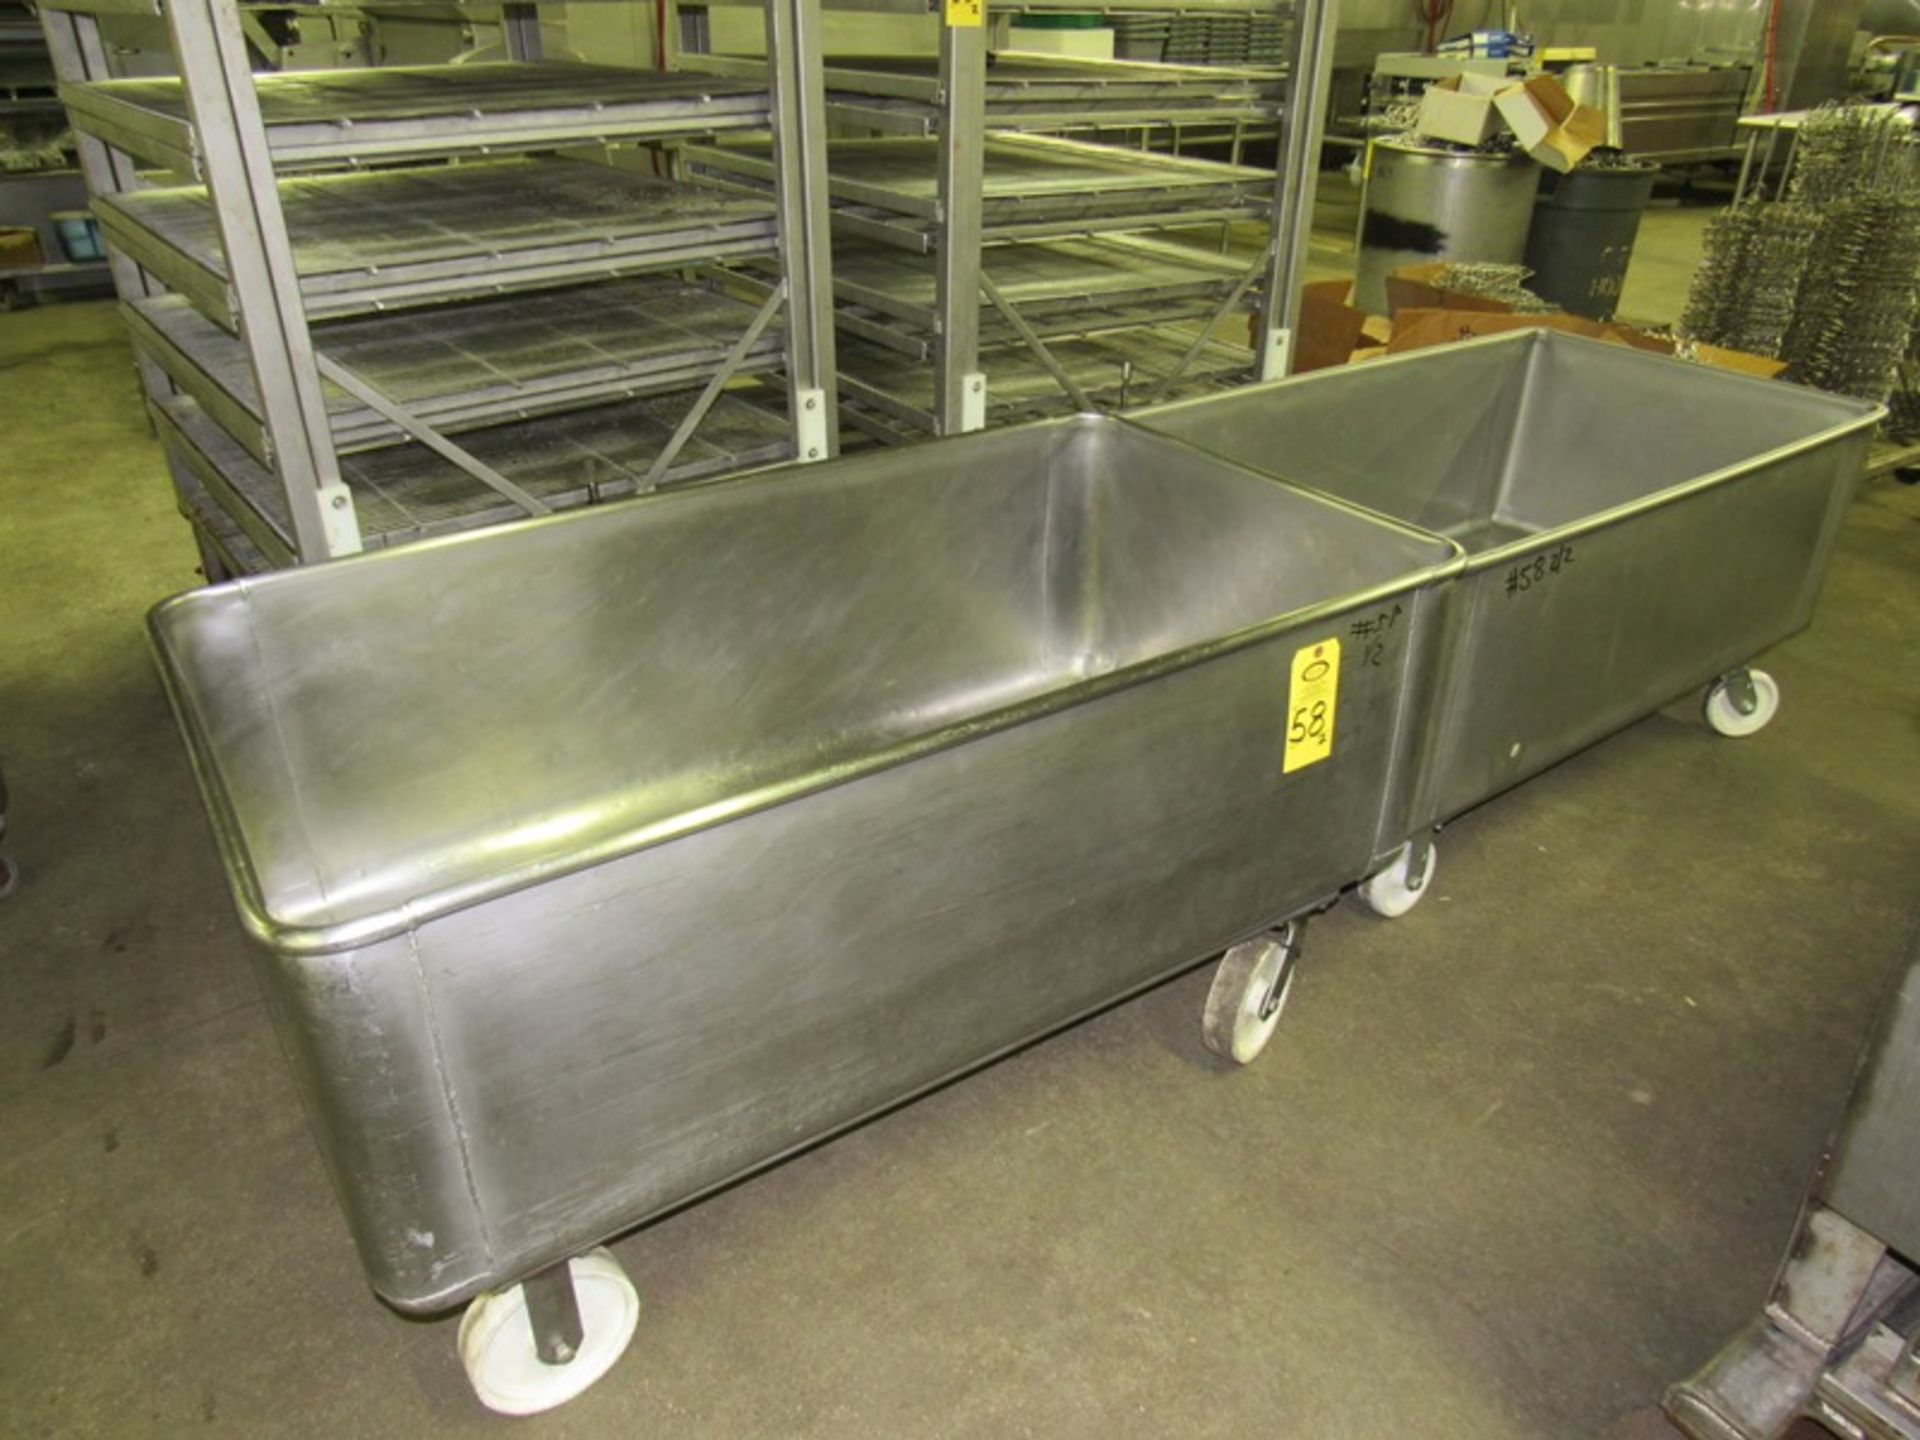 Stainless Steel Meat Trucks, 30" W X 55" L X 18" D (All Funds Must Be Received by Friday, August 9th